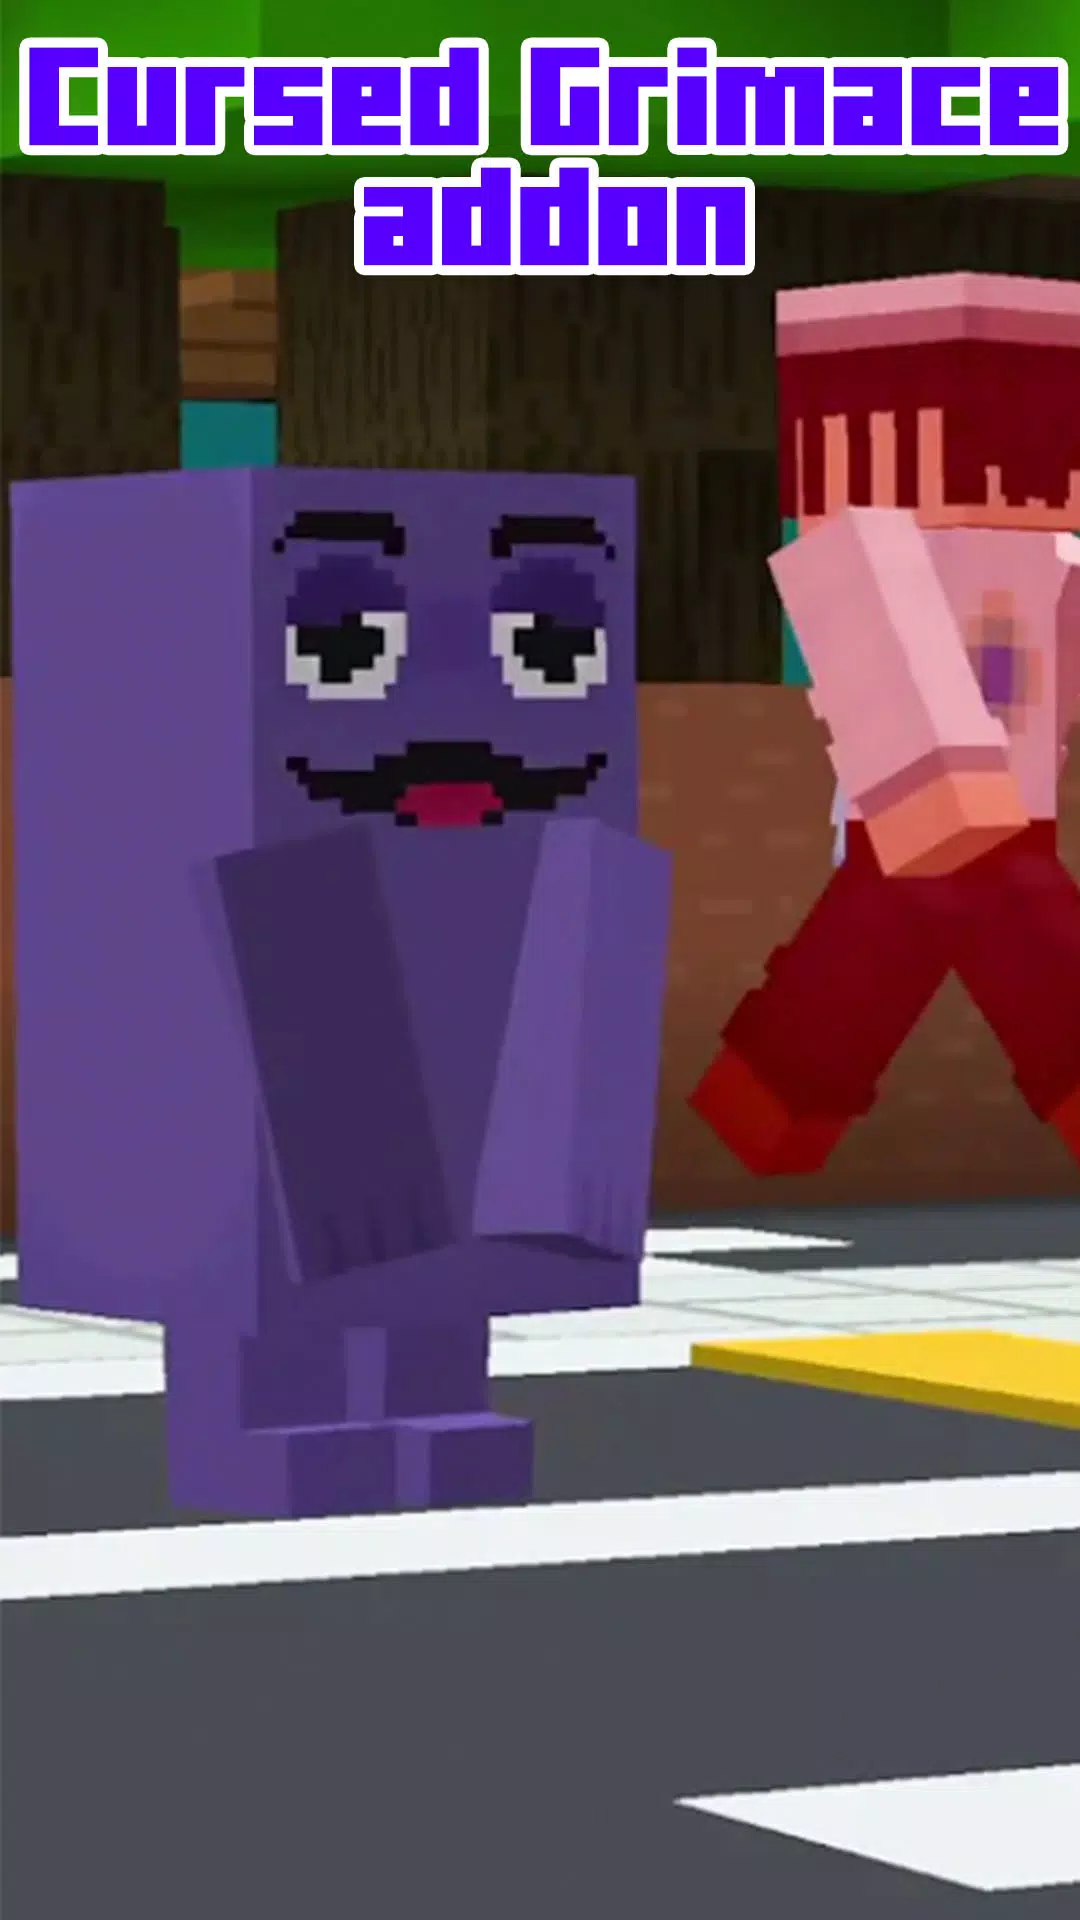 Grimace Shake Minecraft Mod for Android - Free App Download